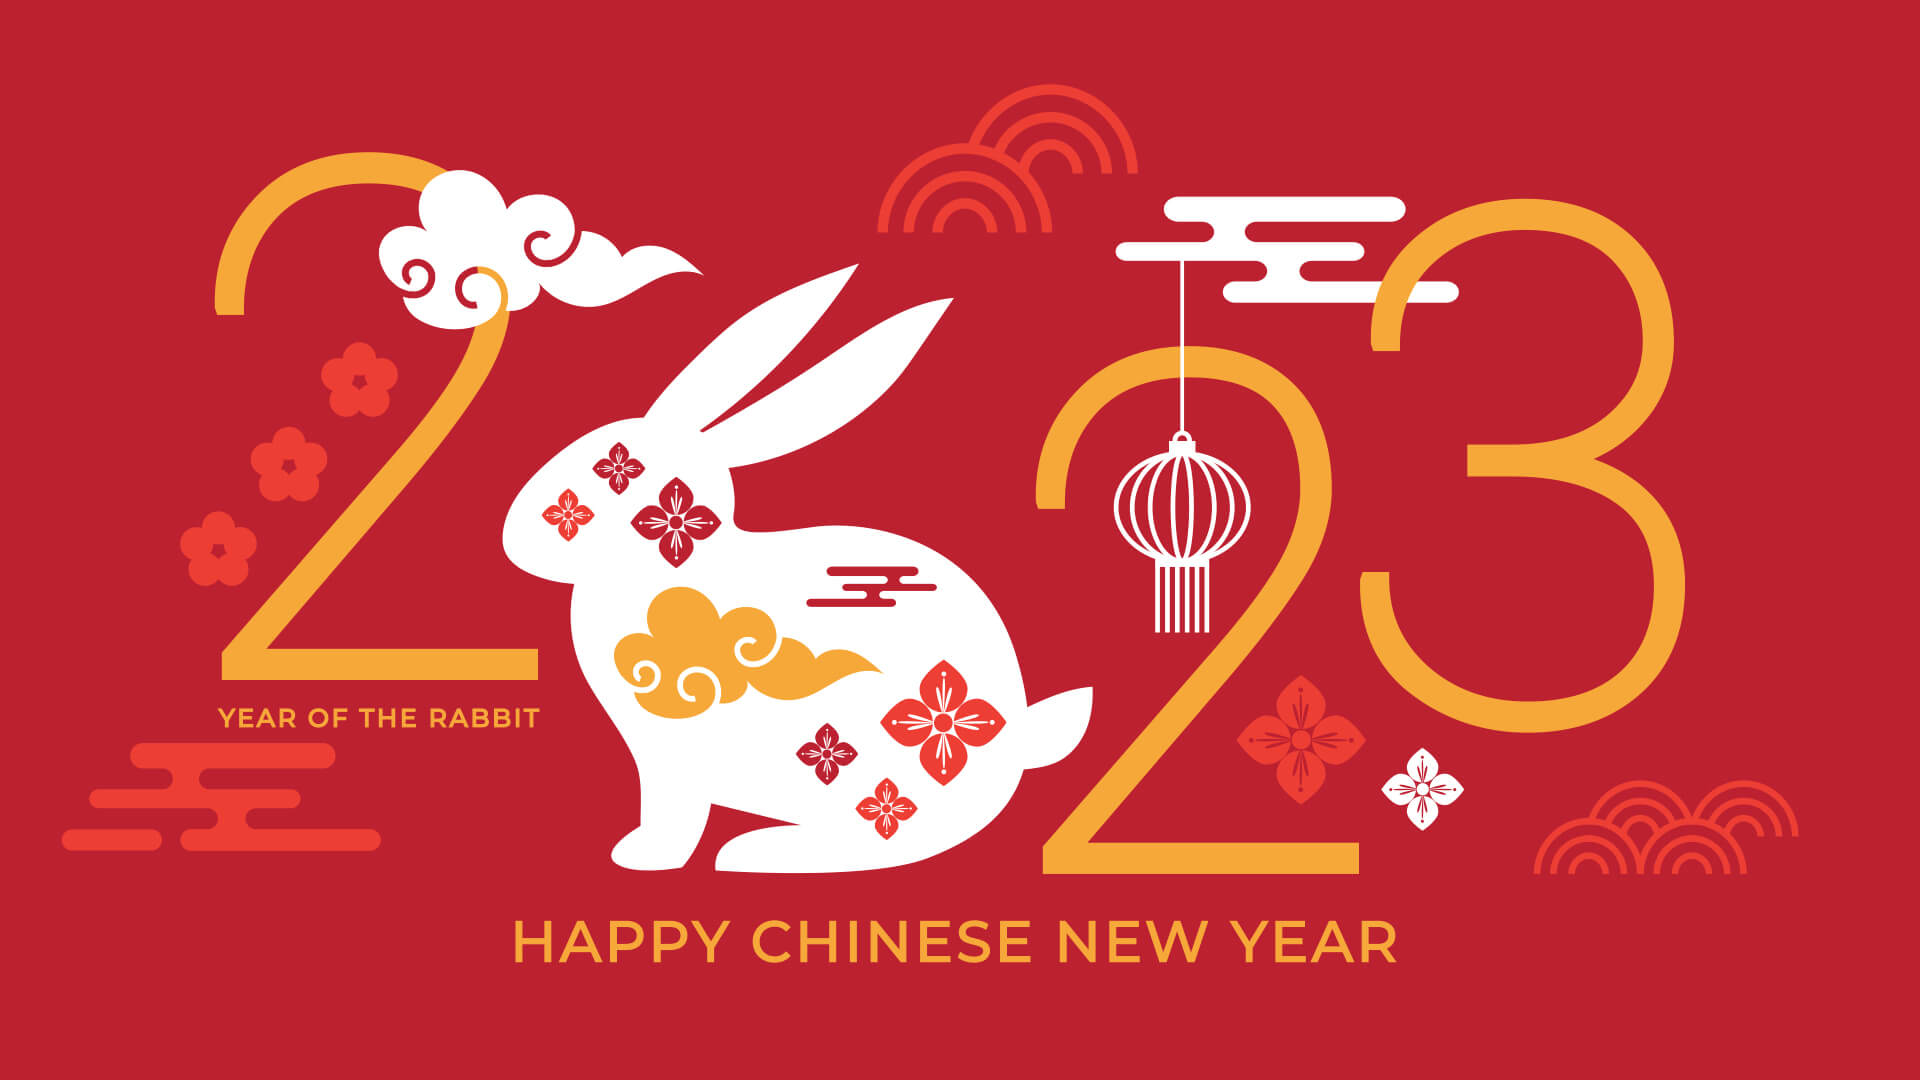 Chinese & Lunar New Year